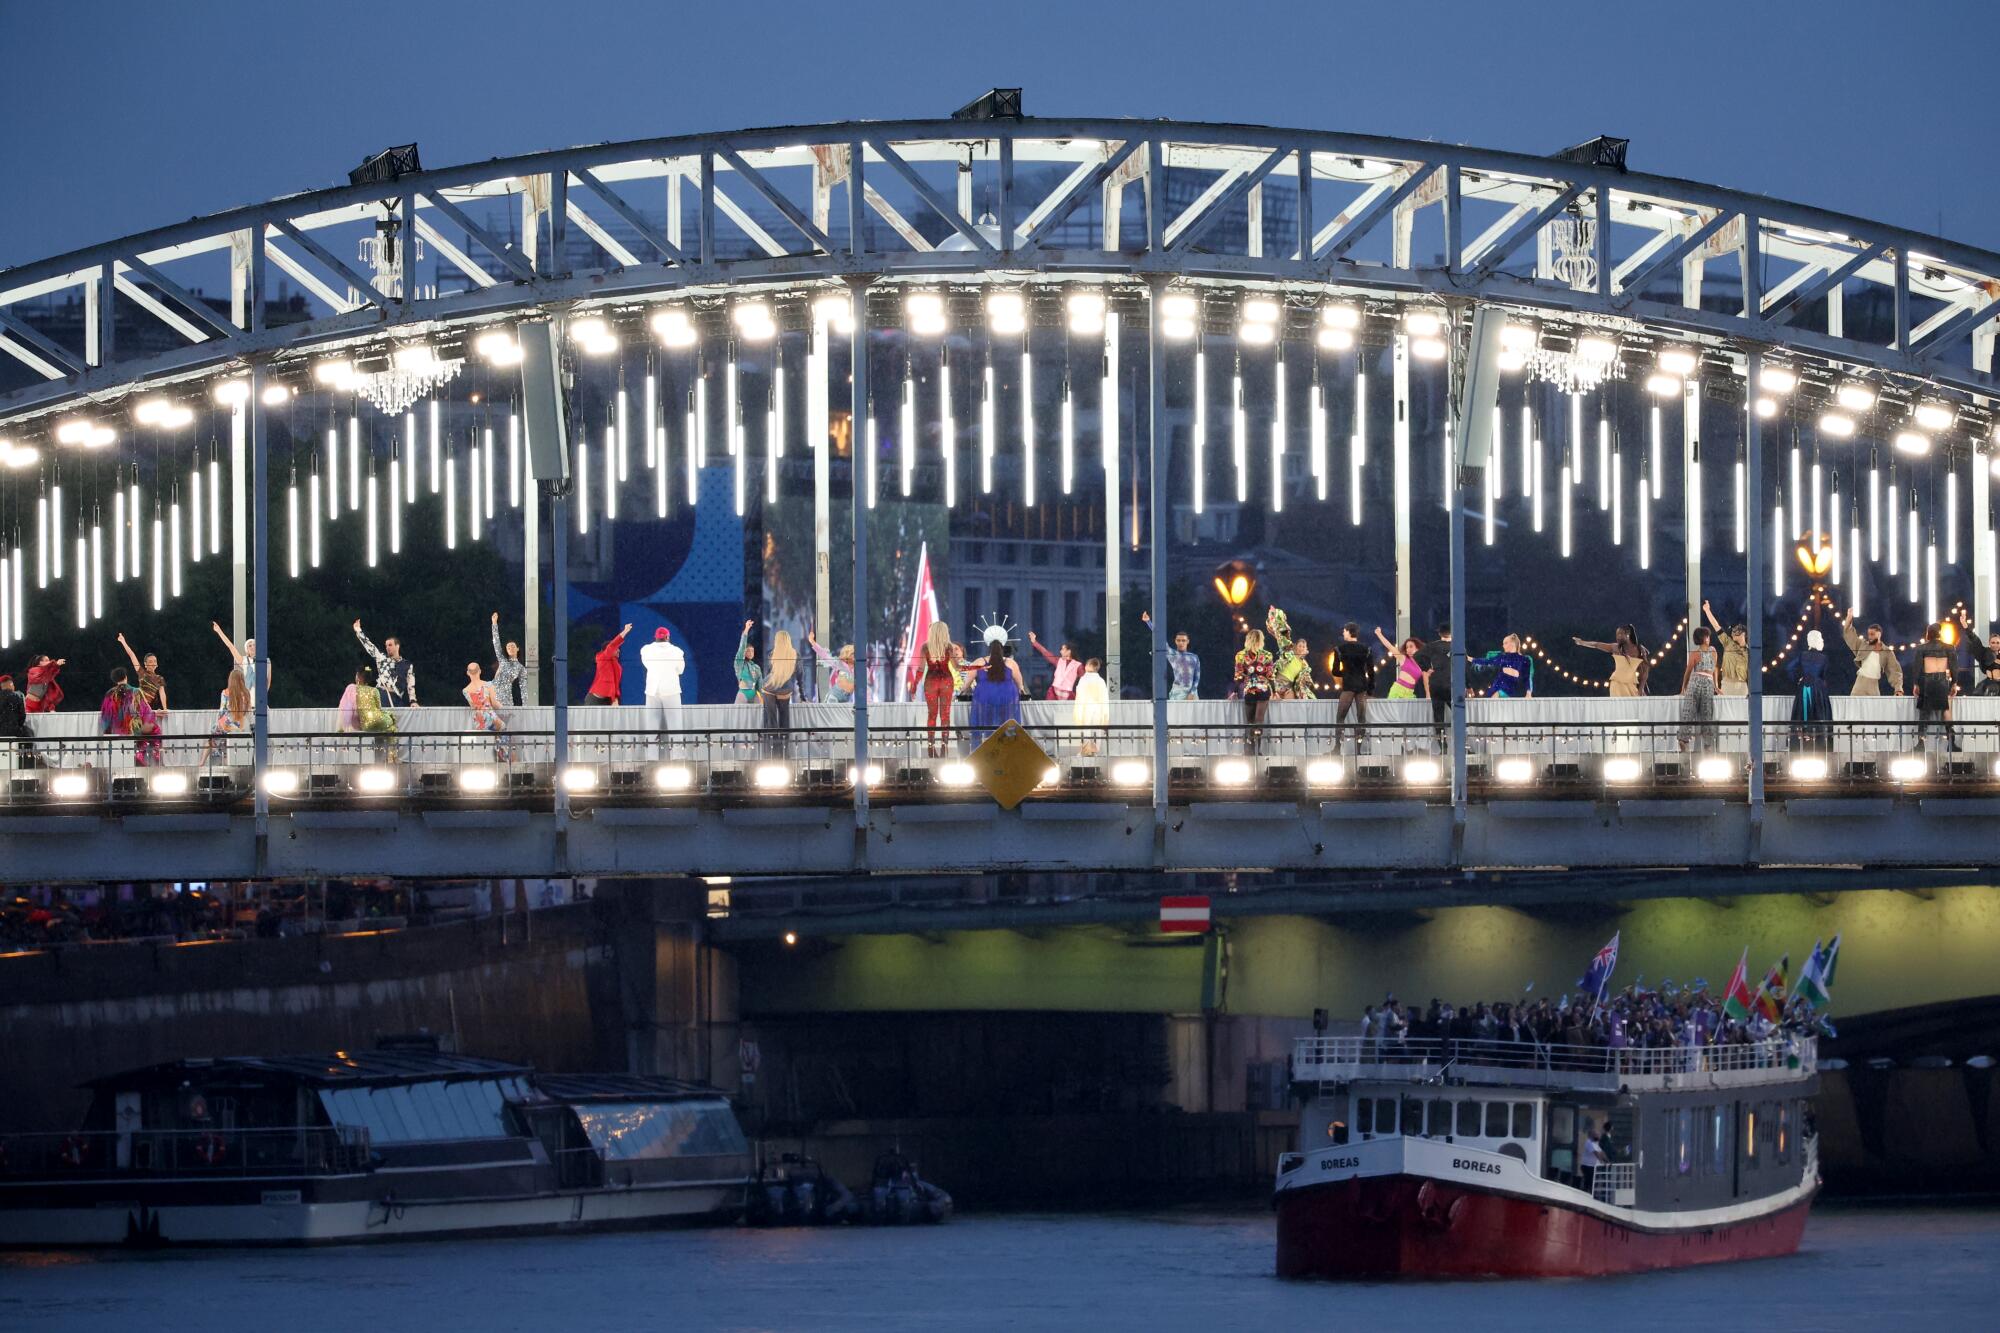 Performers and models at a catwalk erected along the Passerelle Debilly bridge on the Seine River.